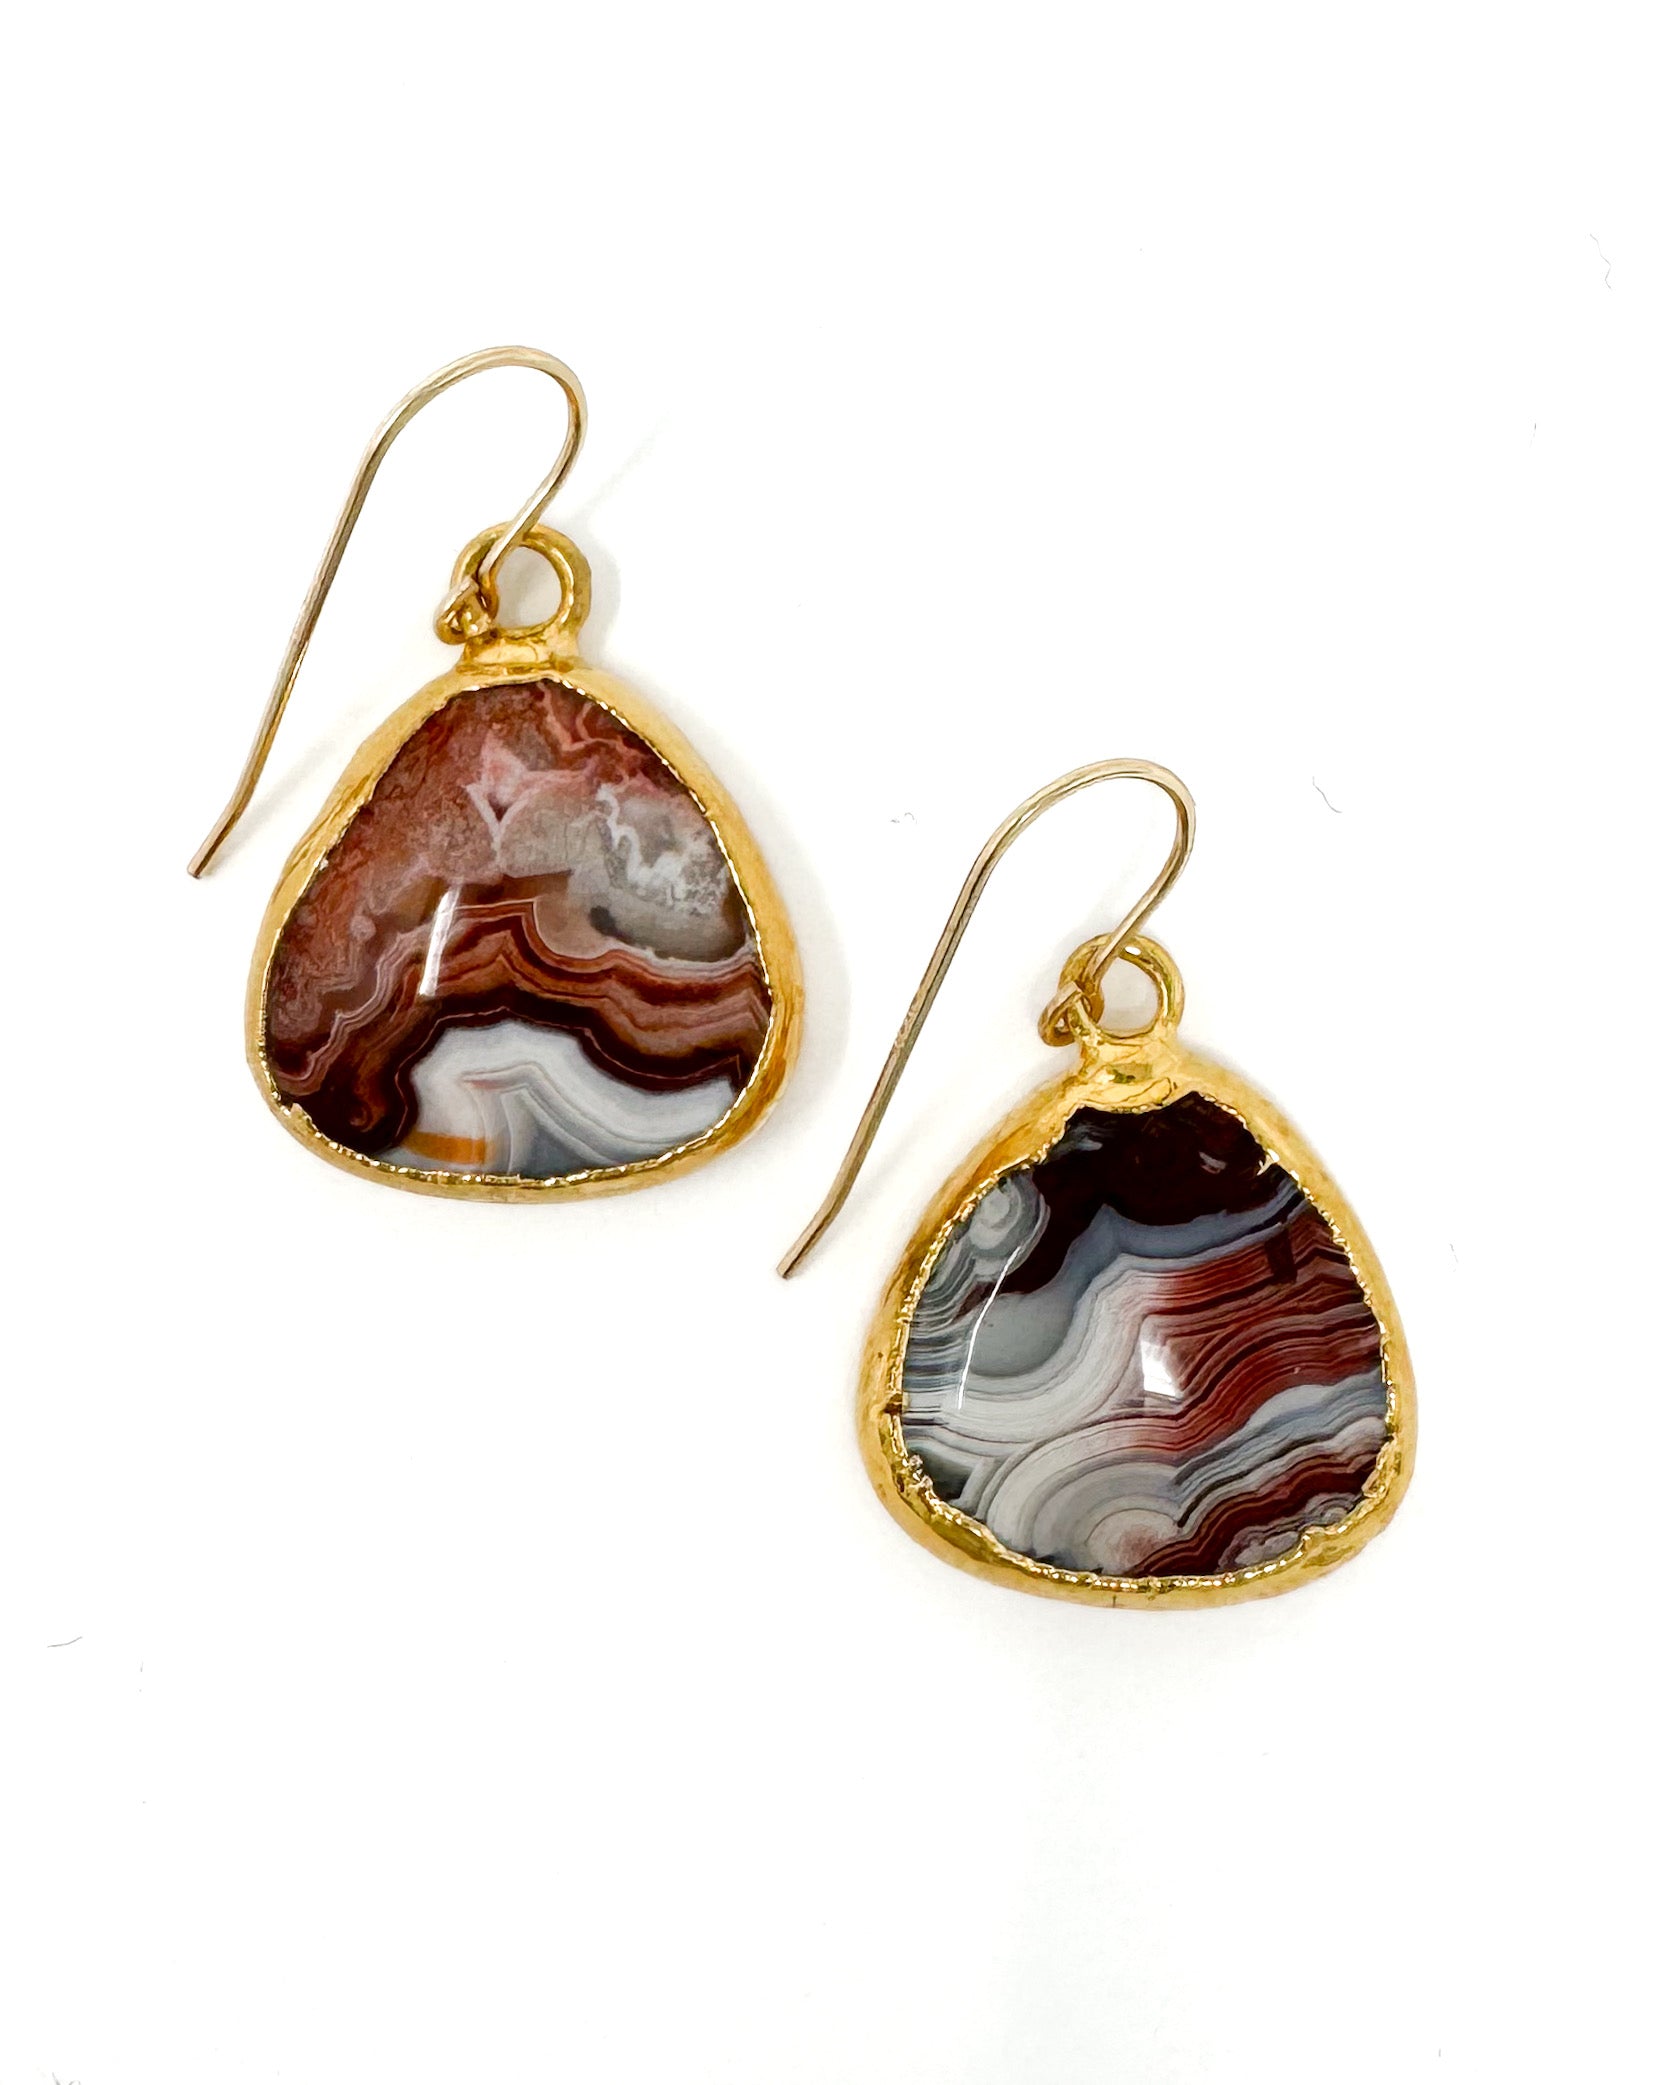 Gold Trimmed Lace Agate Earrings